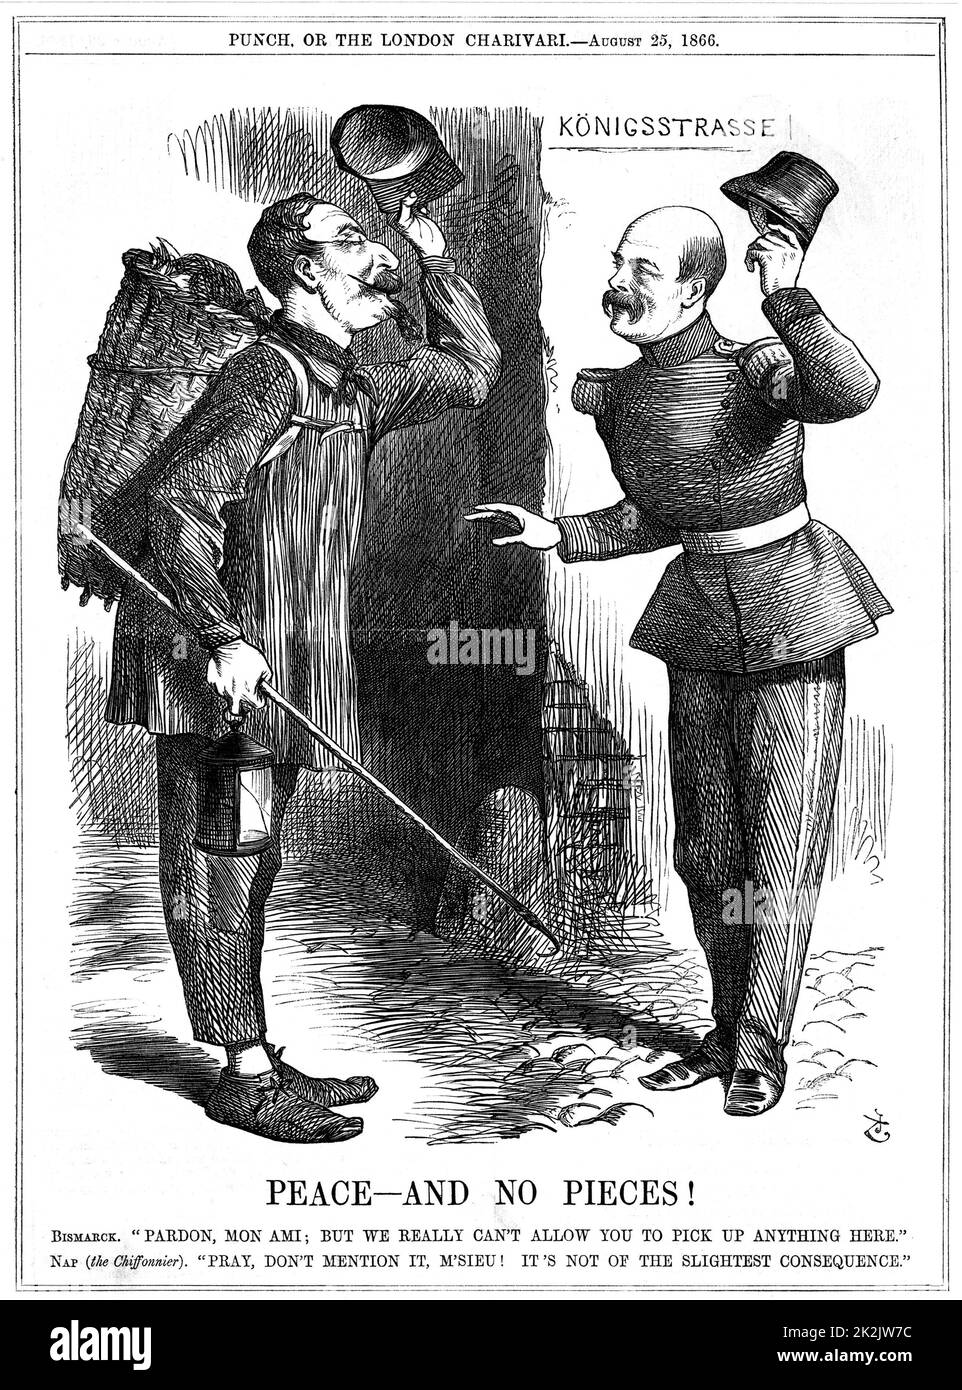 Napoleon III, French Emperor 1852-1870, dressed as a rag-picker (Chiffonnier), warned off by Otto von Bismarck, the Prussian Chancellor. Napoleon's territorial ambitions led to Franco-Prussian War of 1870-71. John Tenniel cartoon from Punch, London, 25 August 1866. engraving Stock Photo